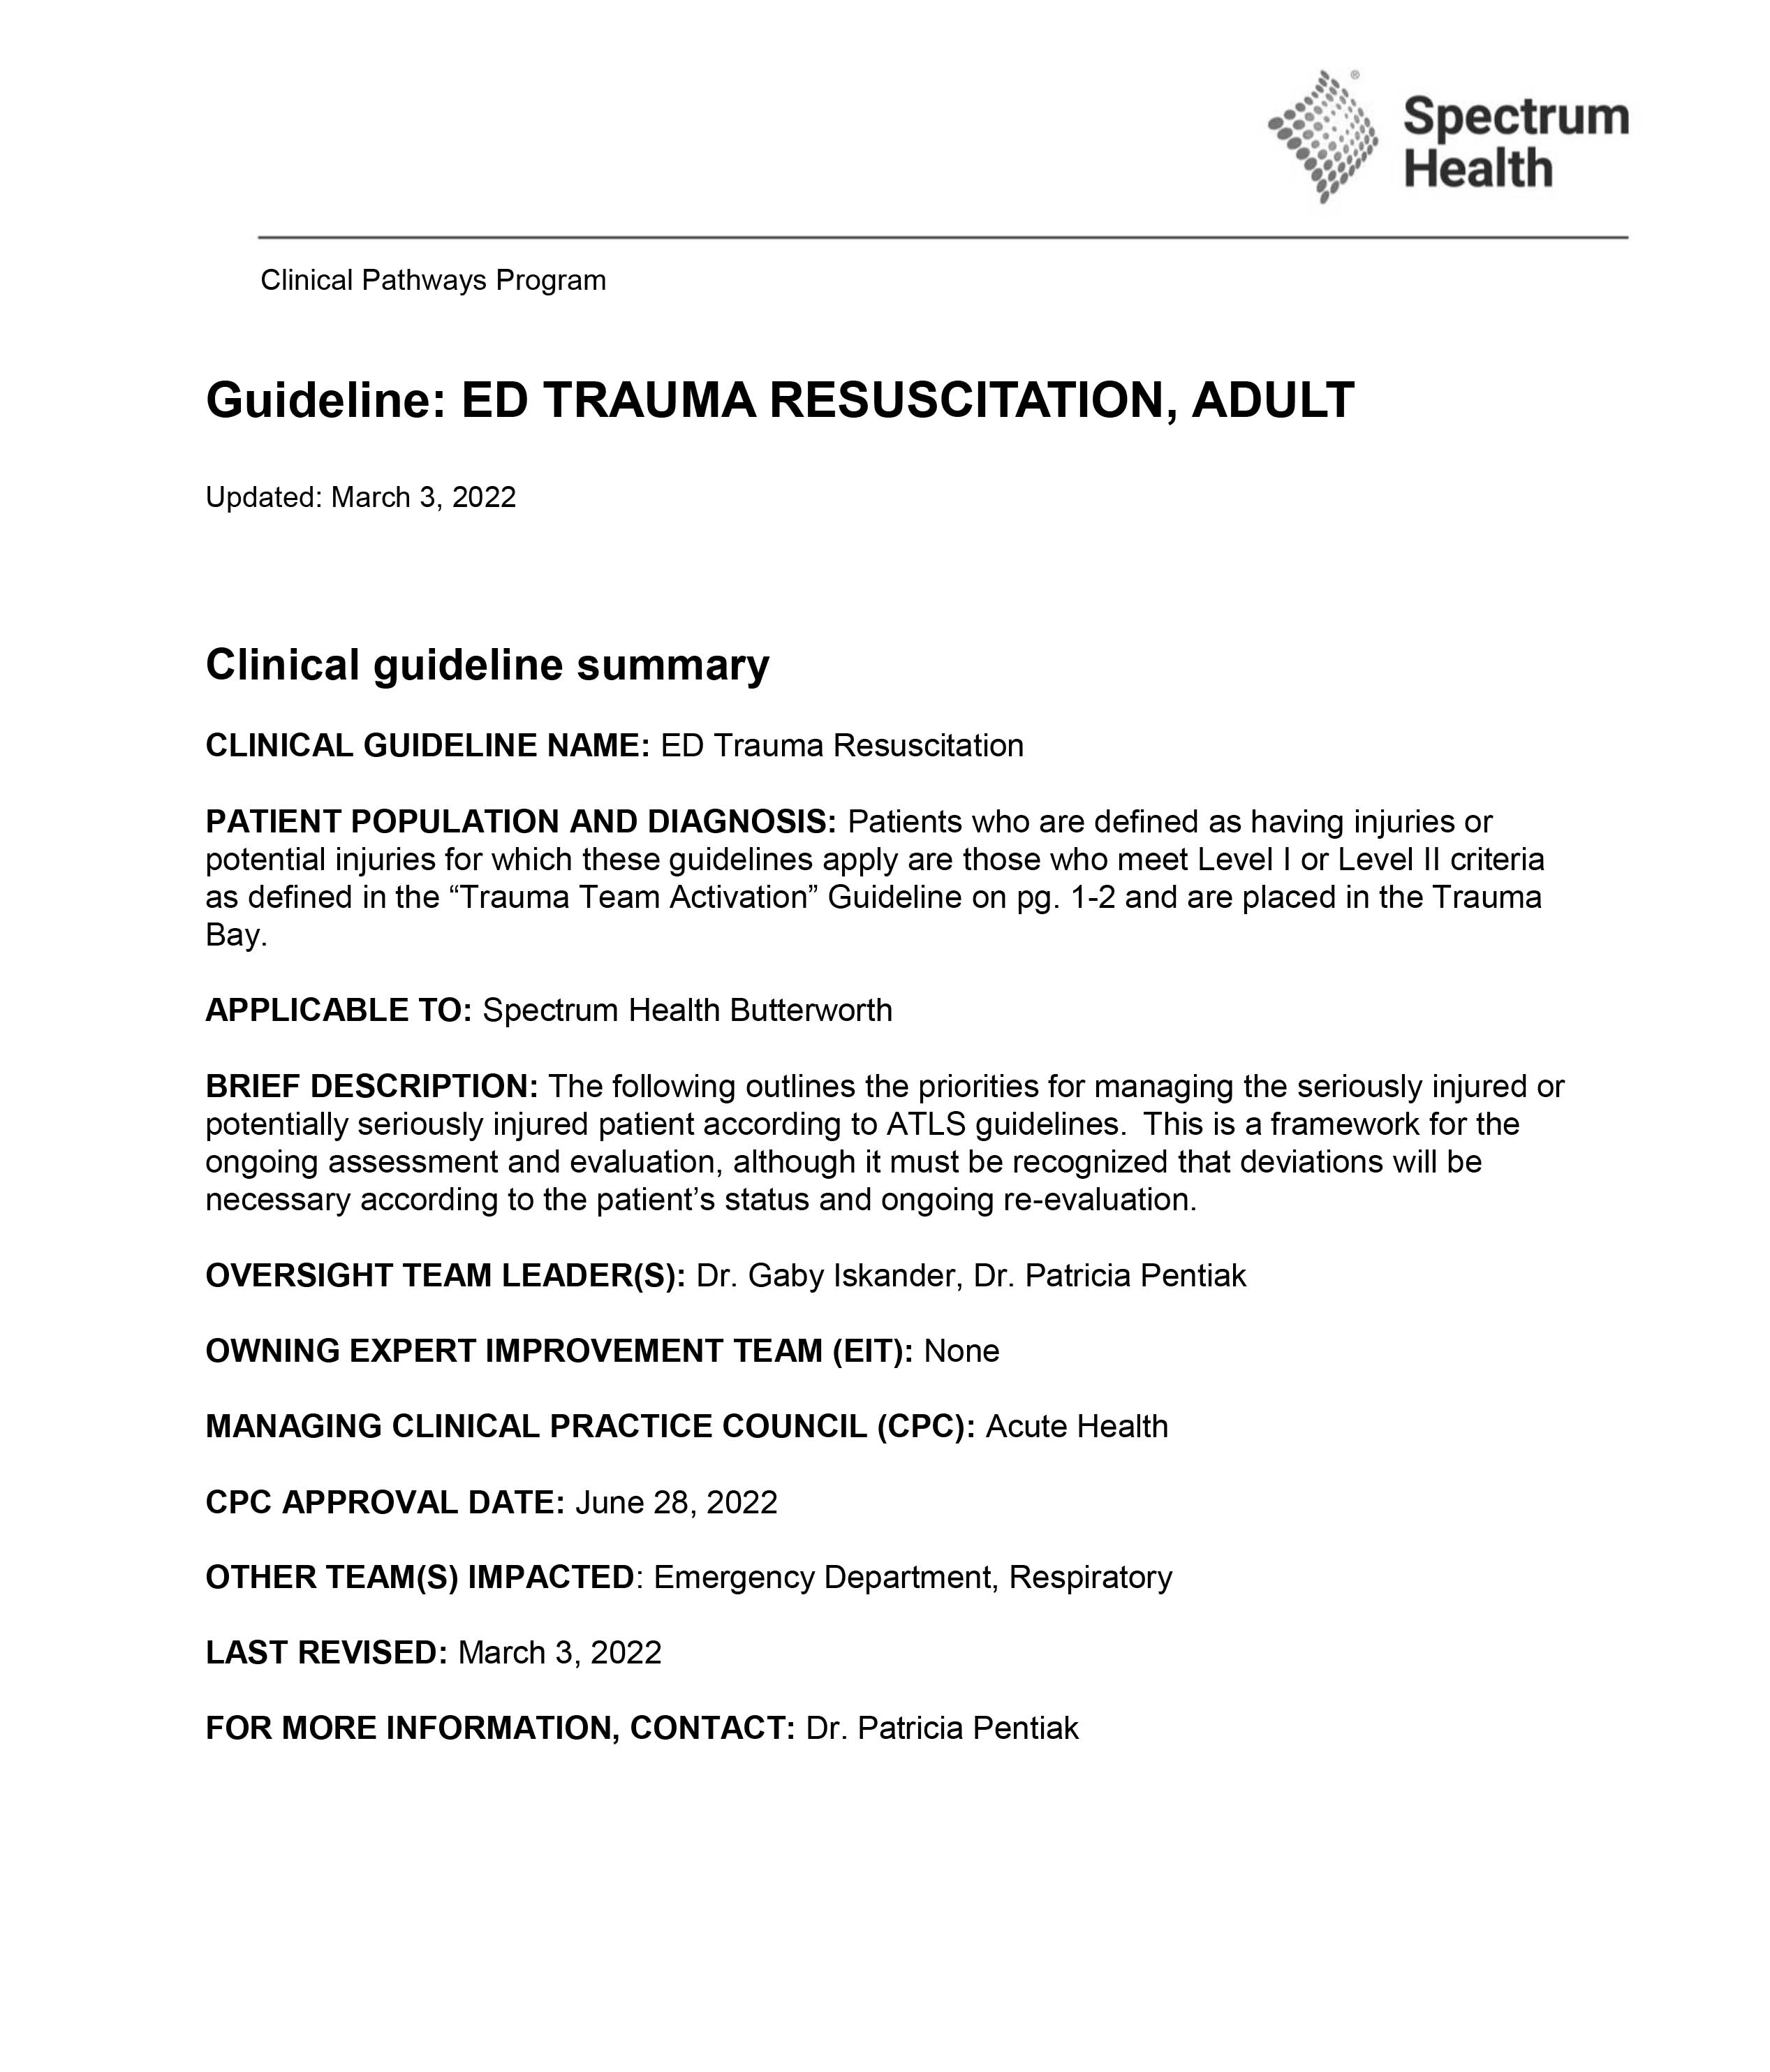 Clinical Pathways Document Image 1